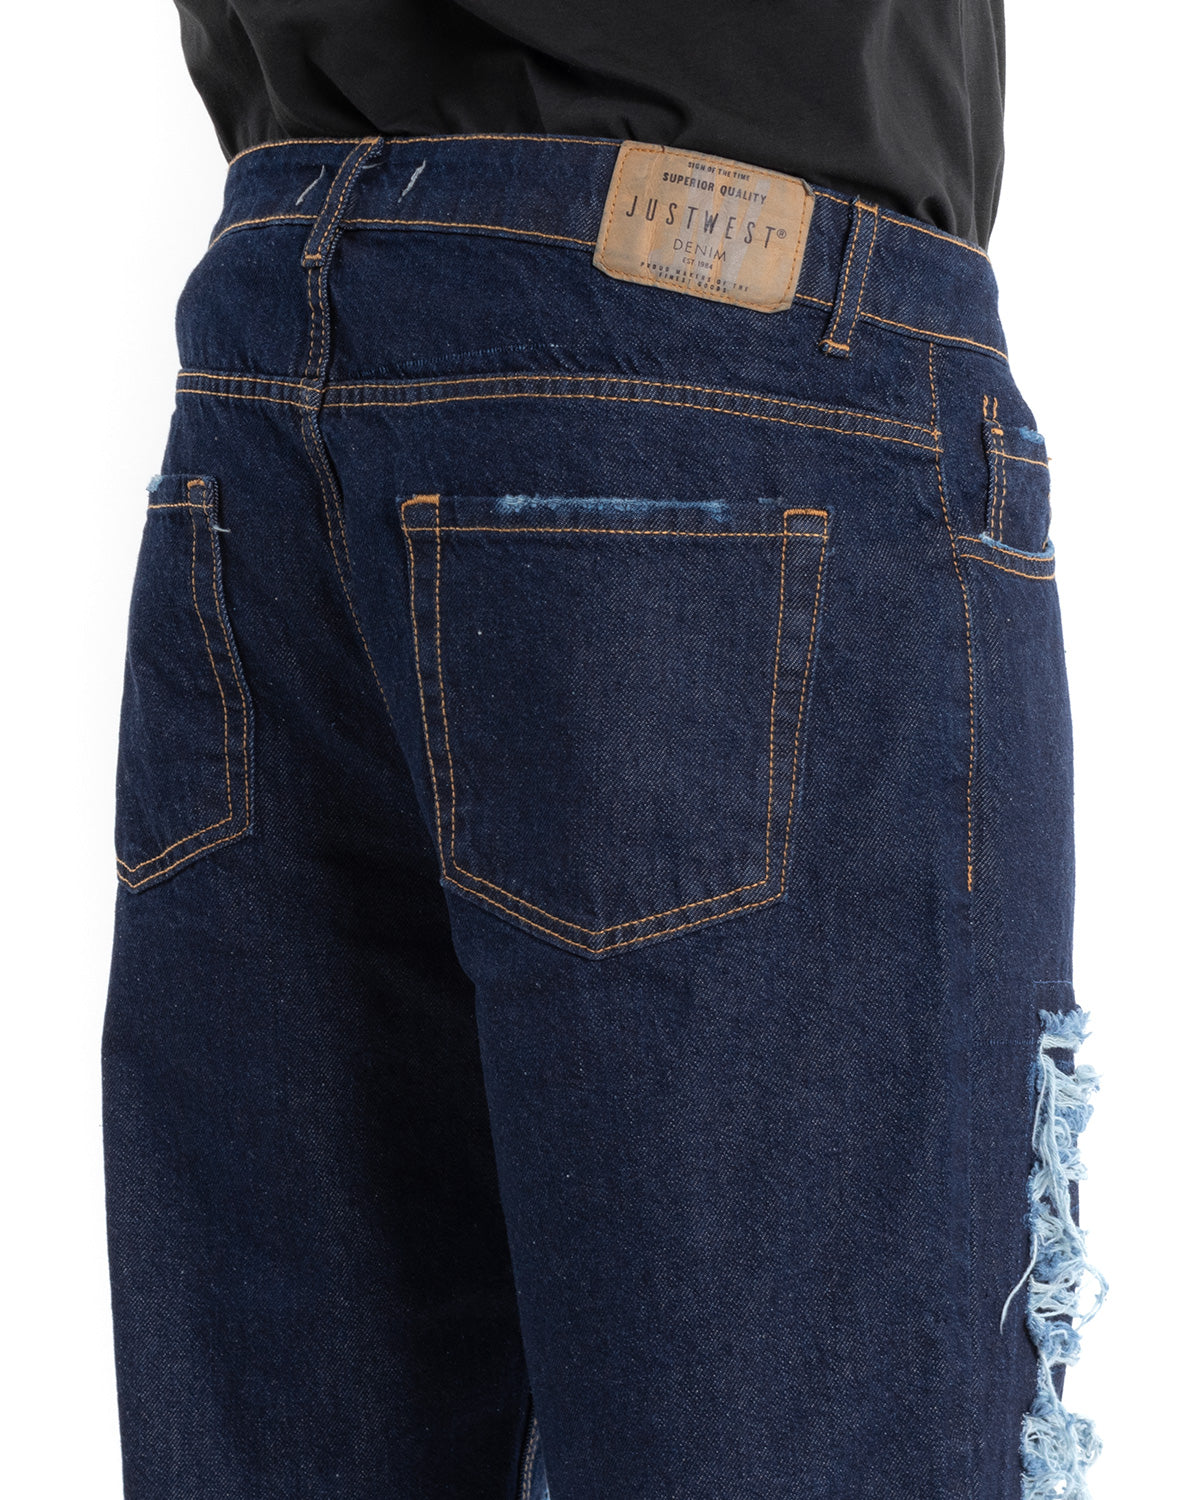 Men's Dark Denim Jeans Trousers With Baggy Ripped Rips Five Pockets GIOSAL-P5452A